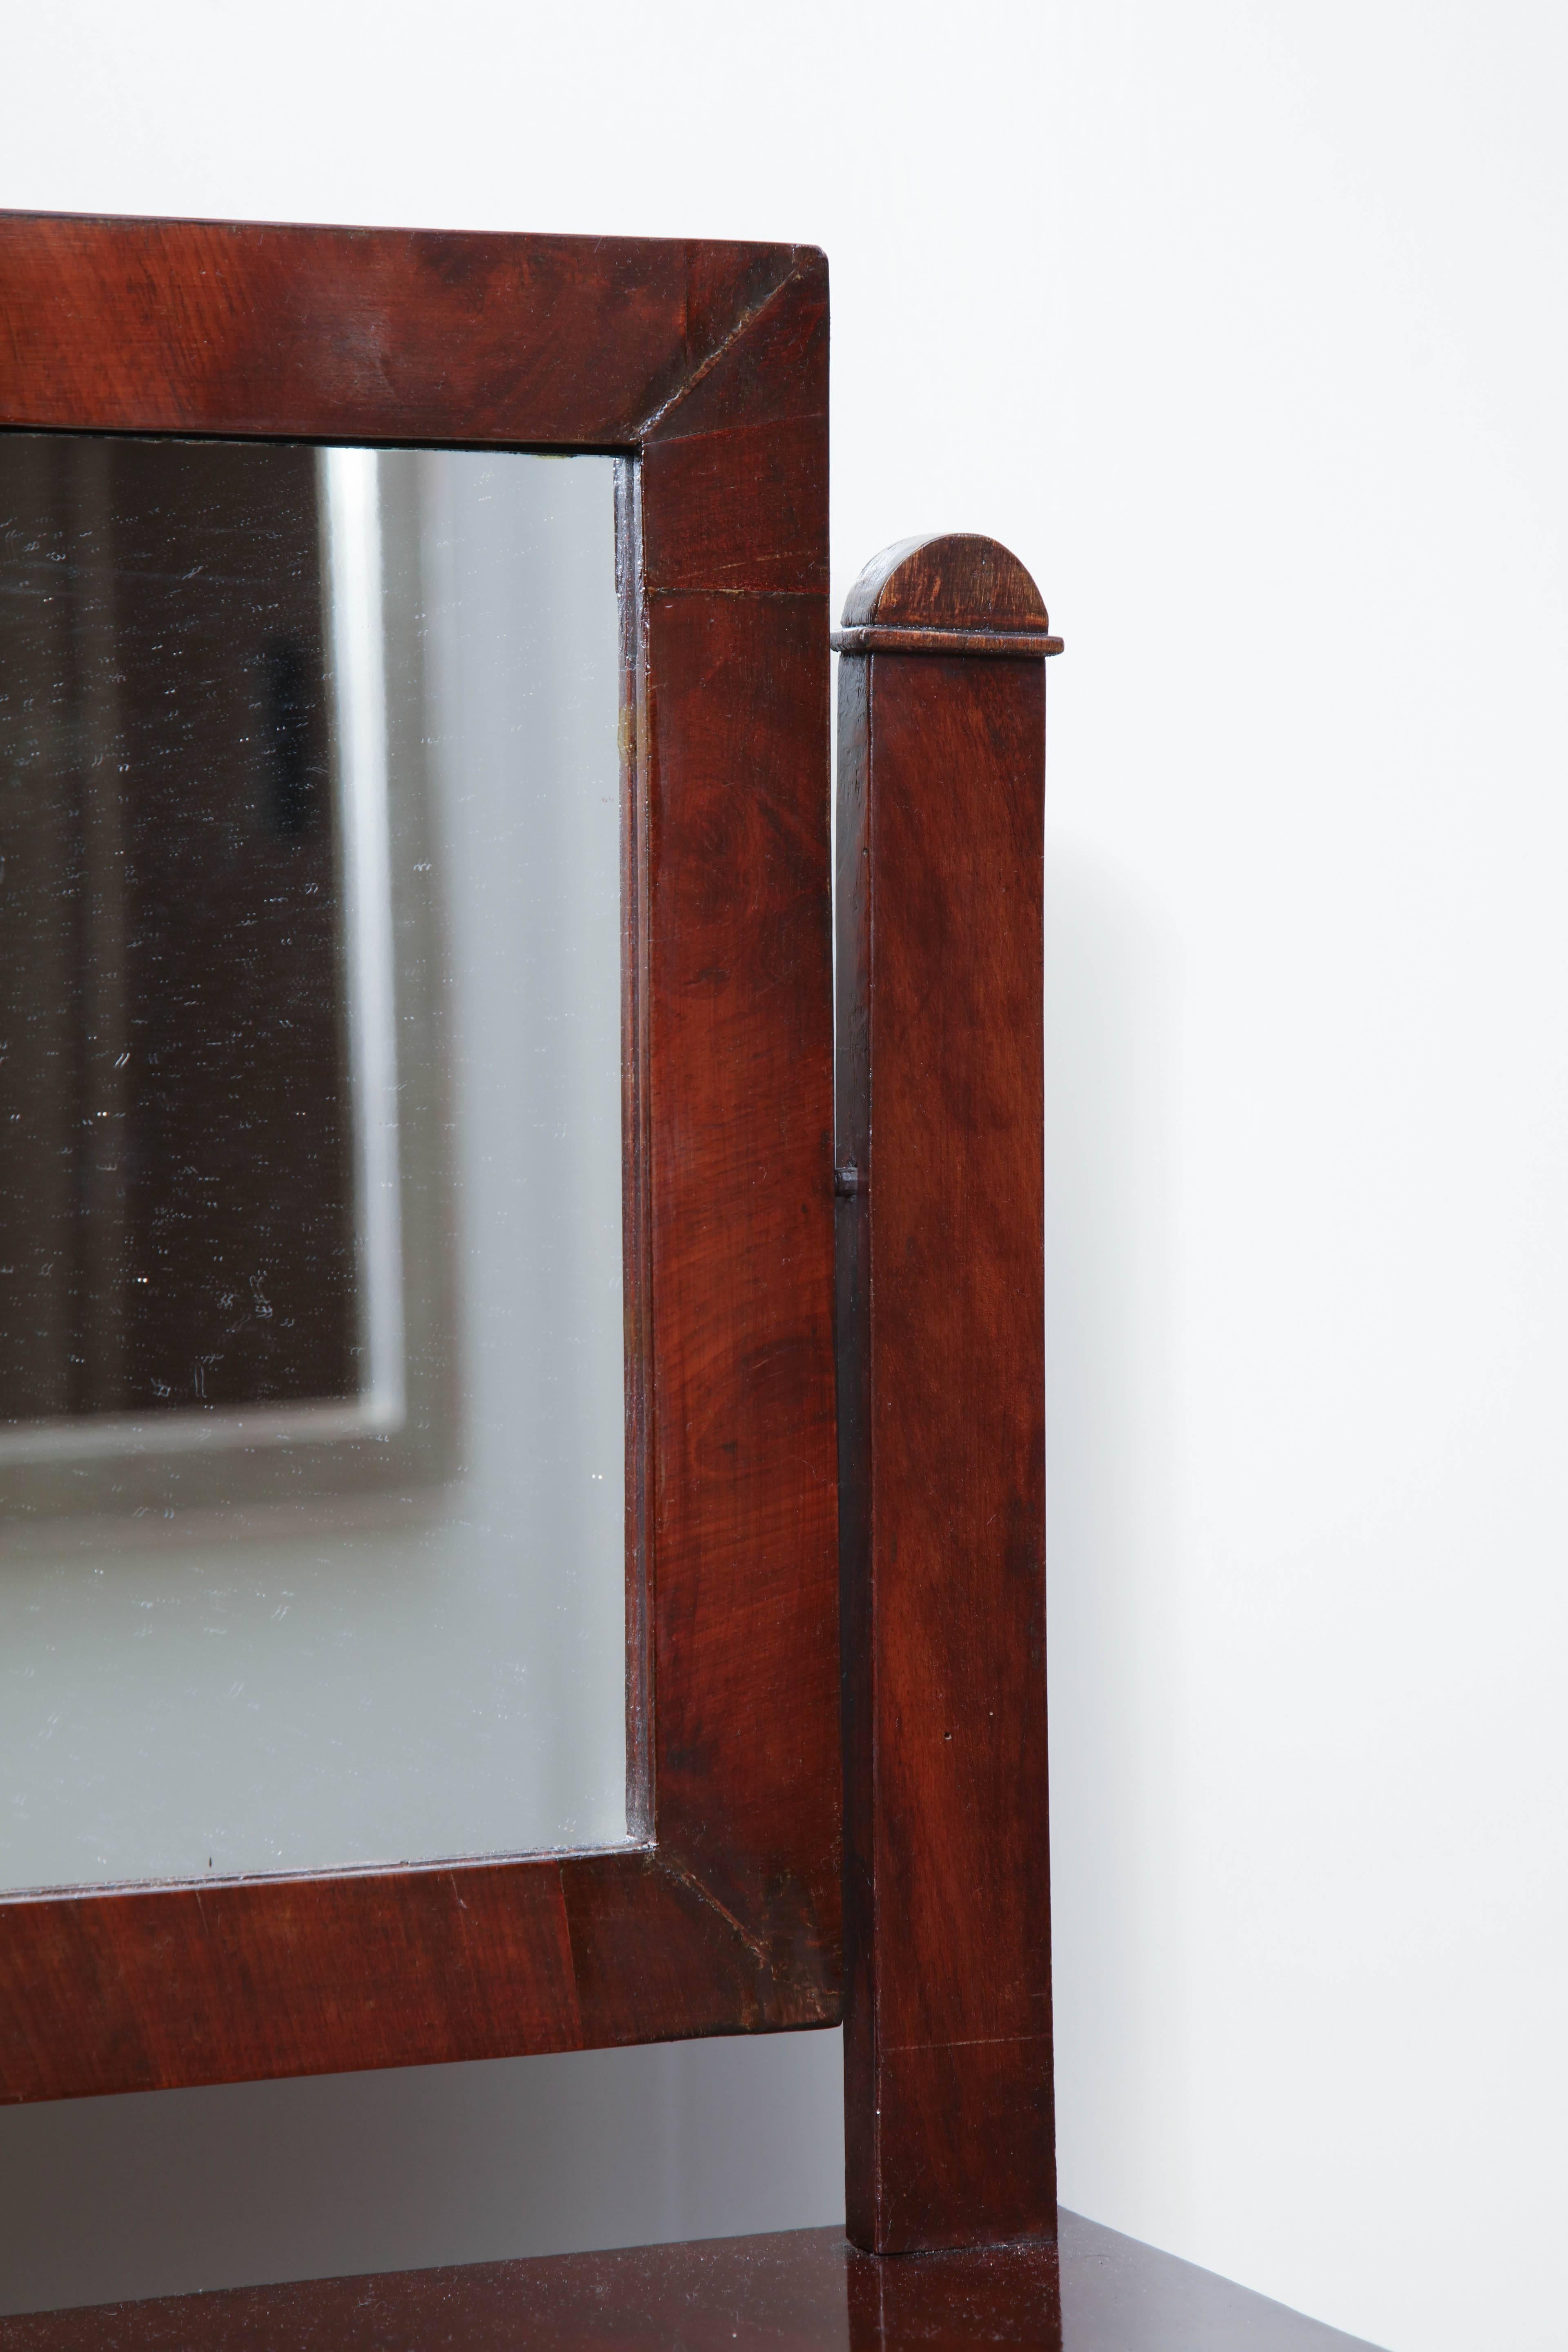 19th Century English mahogany tabletop dressing mirror with drawer.